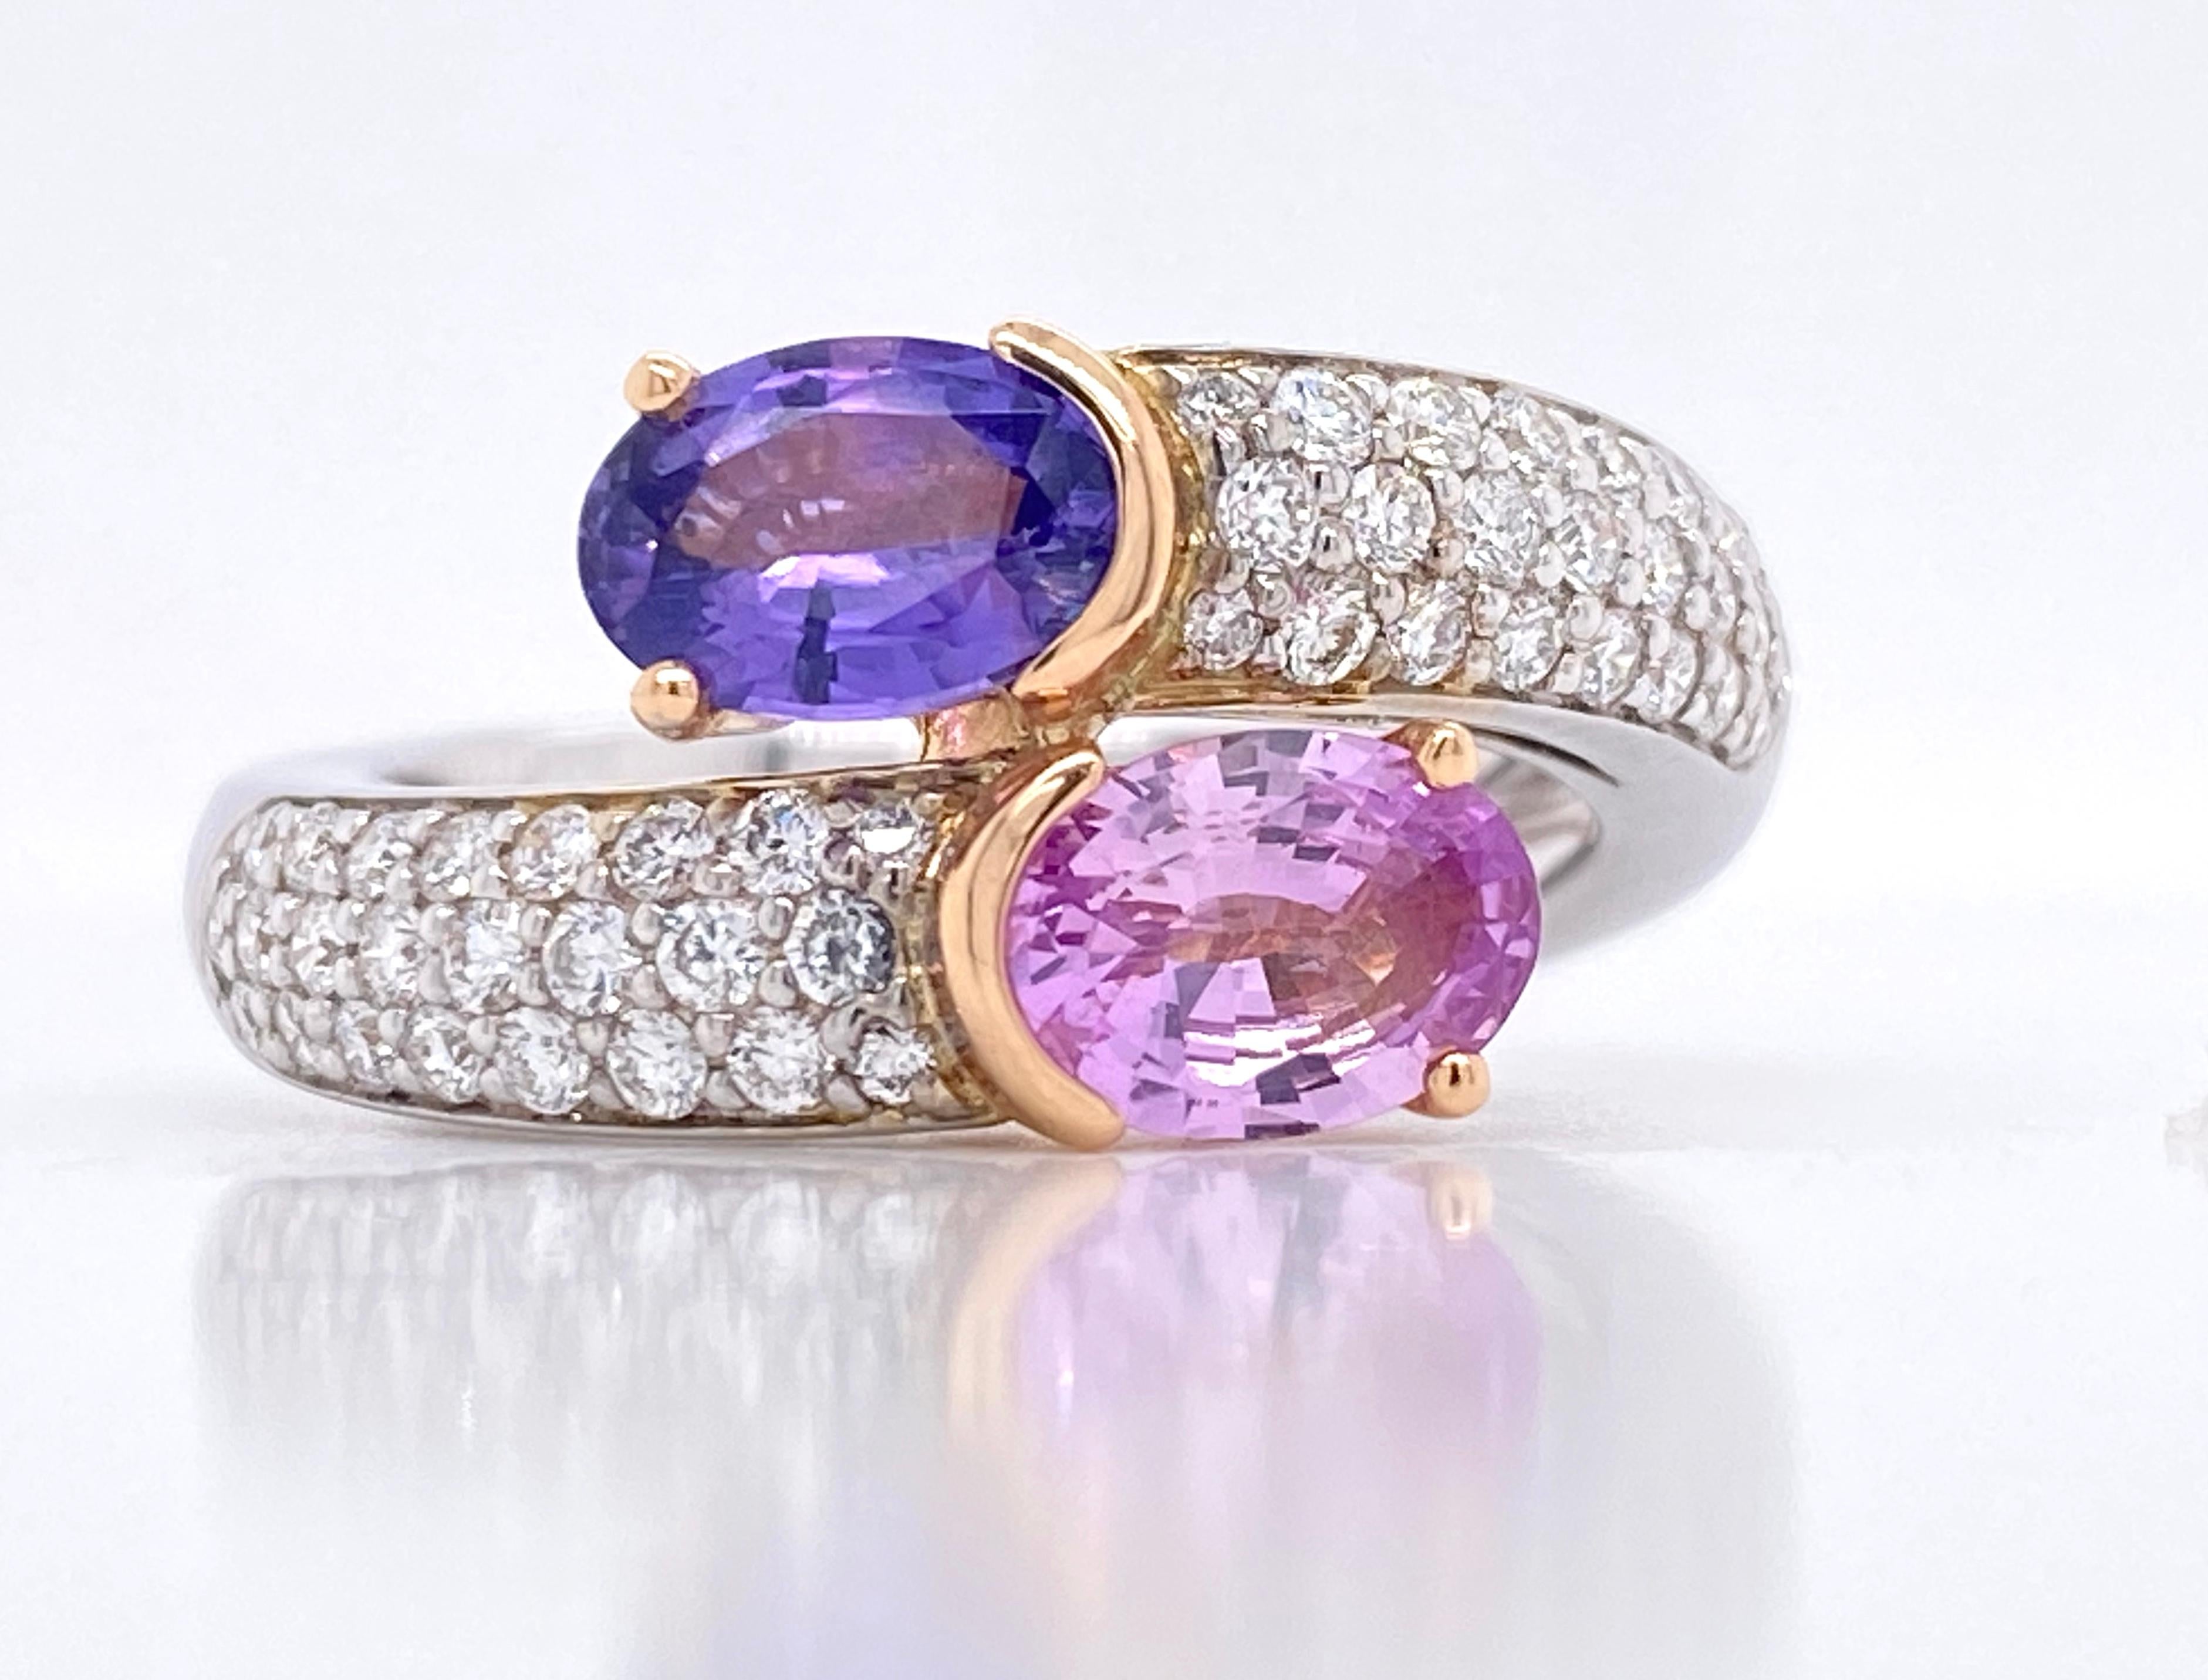 Oval Cut Unheated Pink Sapphire, Diamonds on White and Rose Gold 18 Karat Cocktail Ring